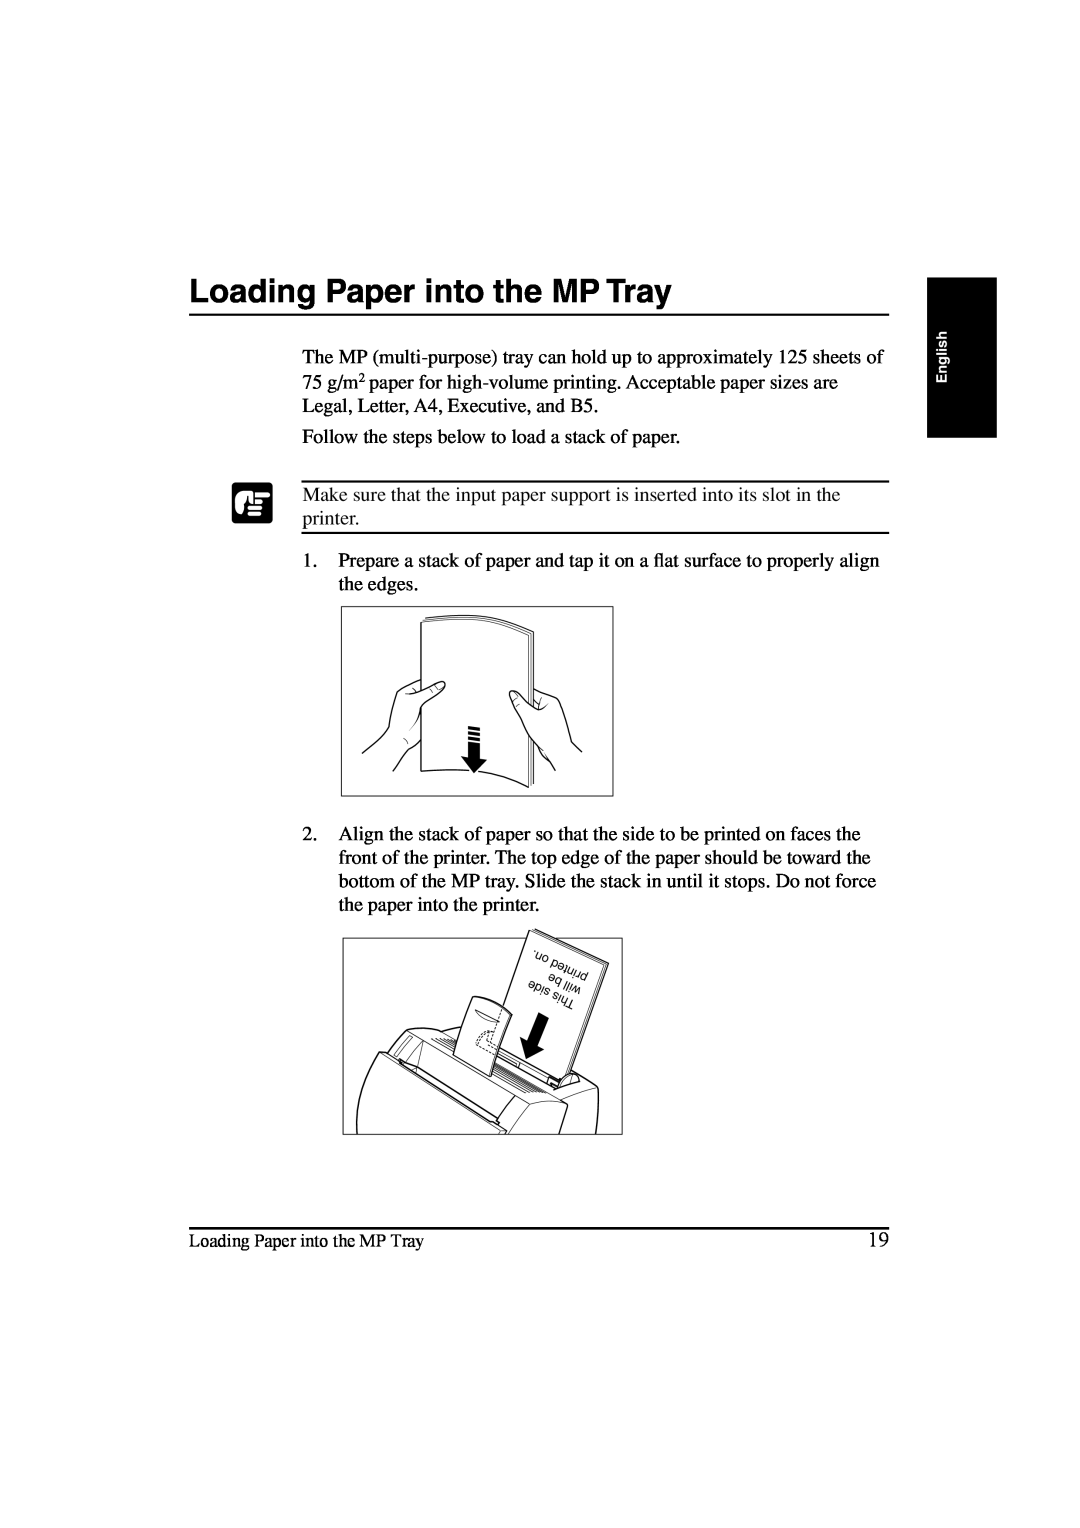 Canon LBP-810 manual Loading Paper into the MP Tray 